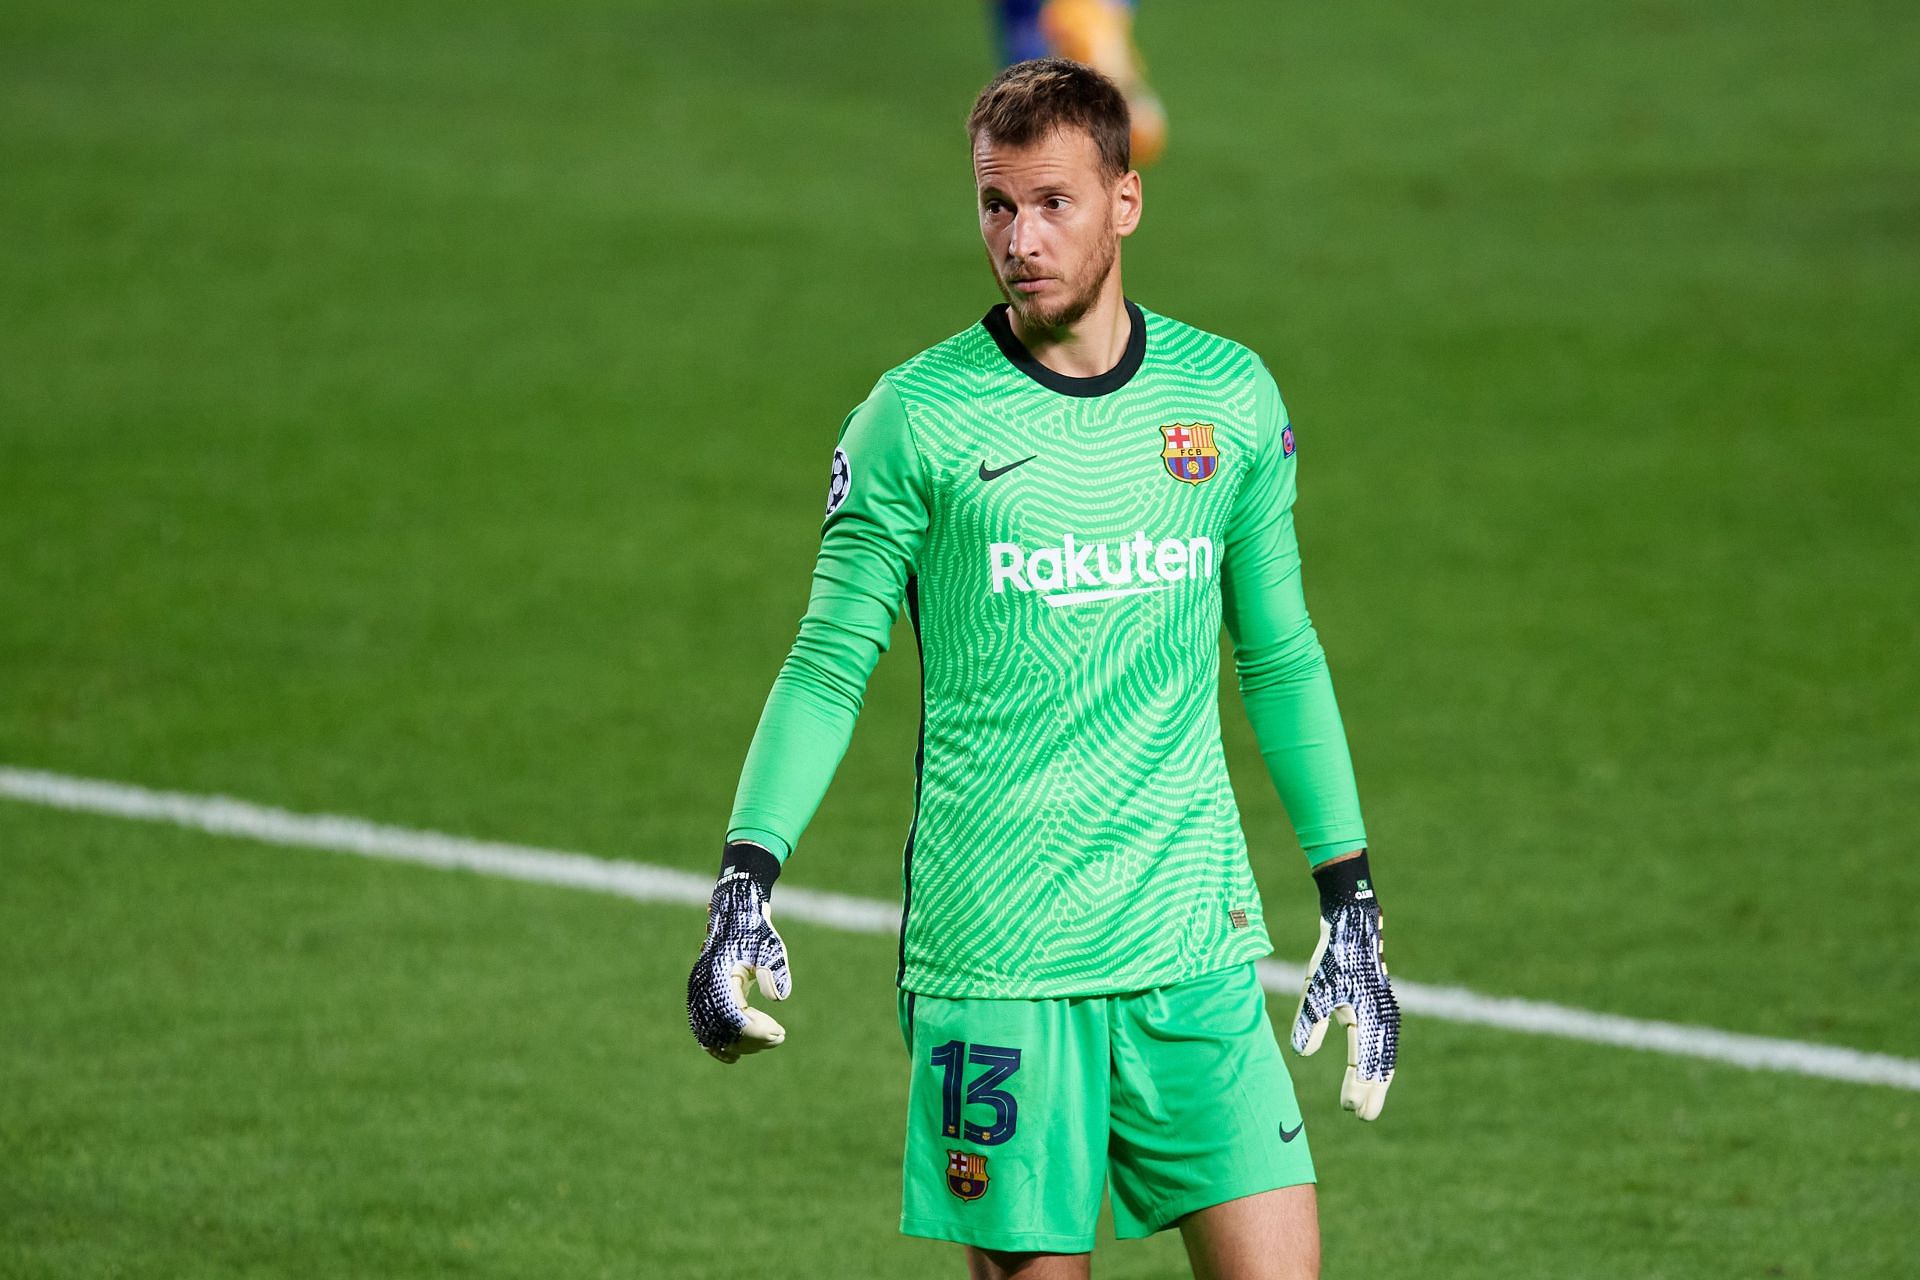 Neto could become the latest player to join the Gunners from Barcelona